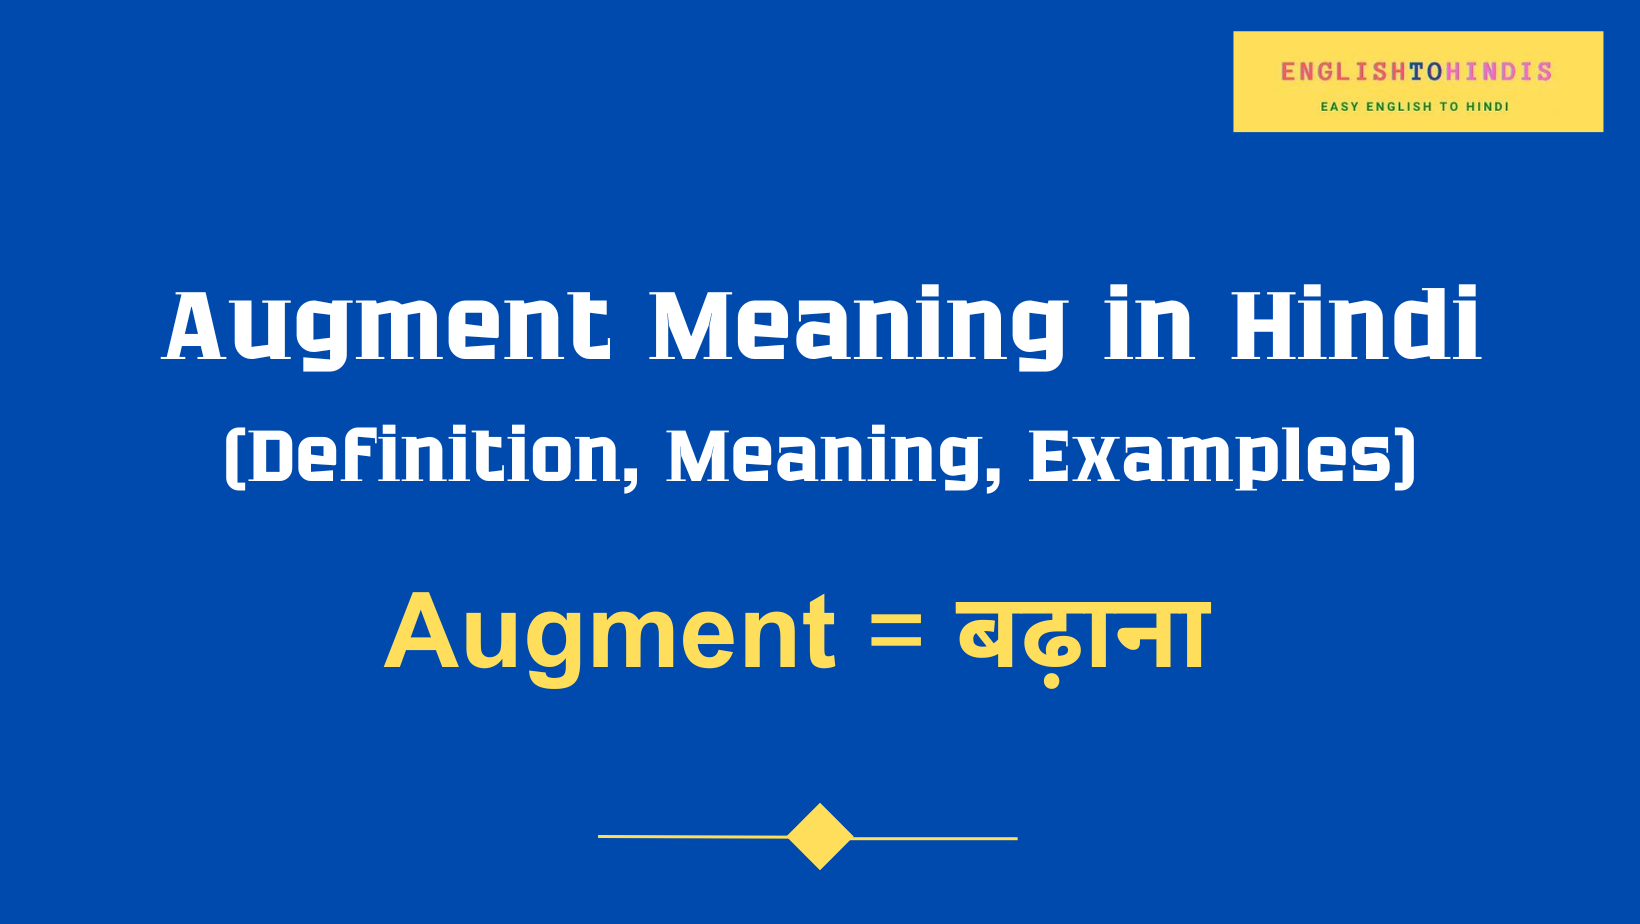 Augment meaning in Hindi